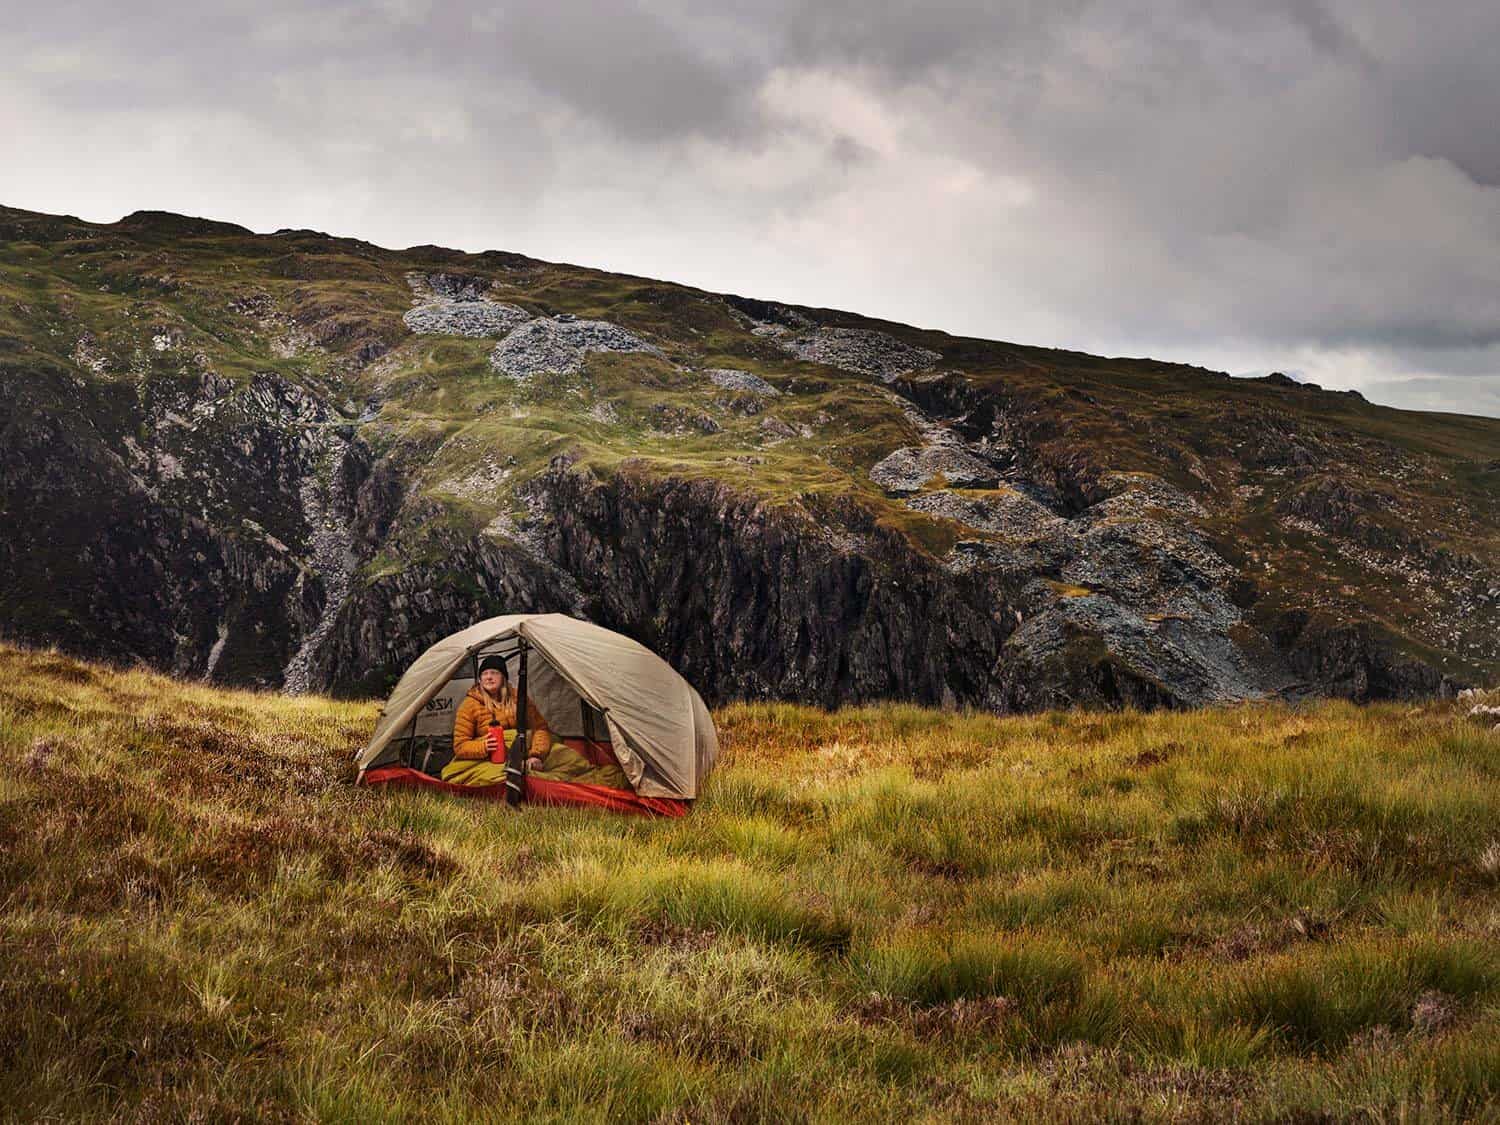 person in yellow coat sits in Near Zero Ultralight backpacking tent in mountainous background